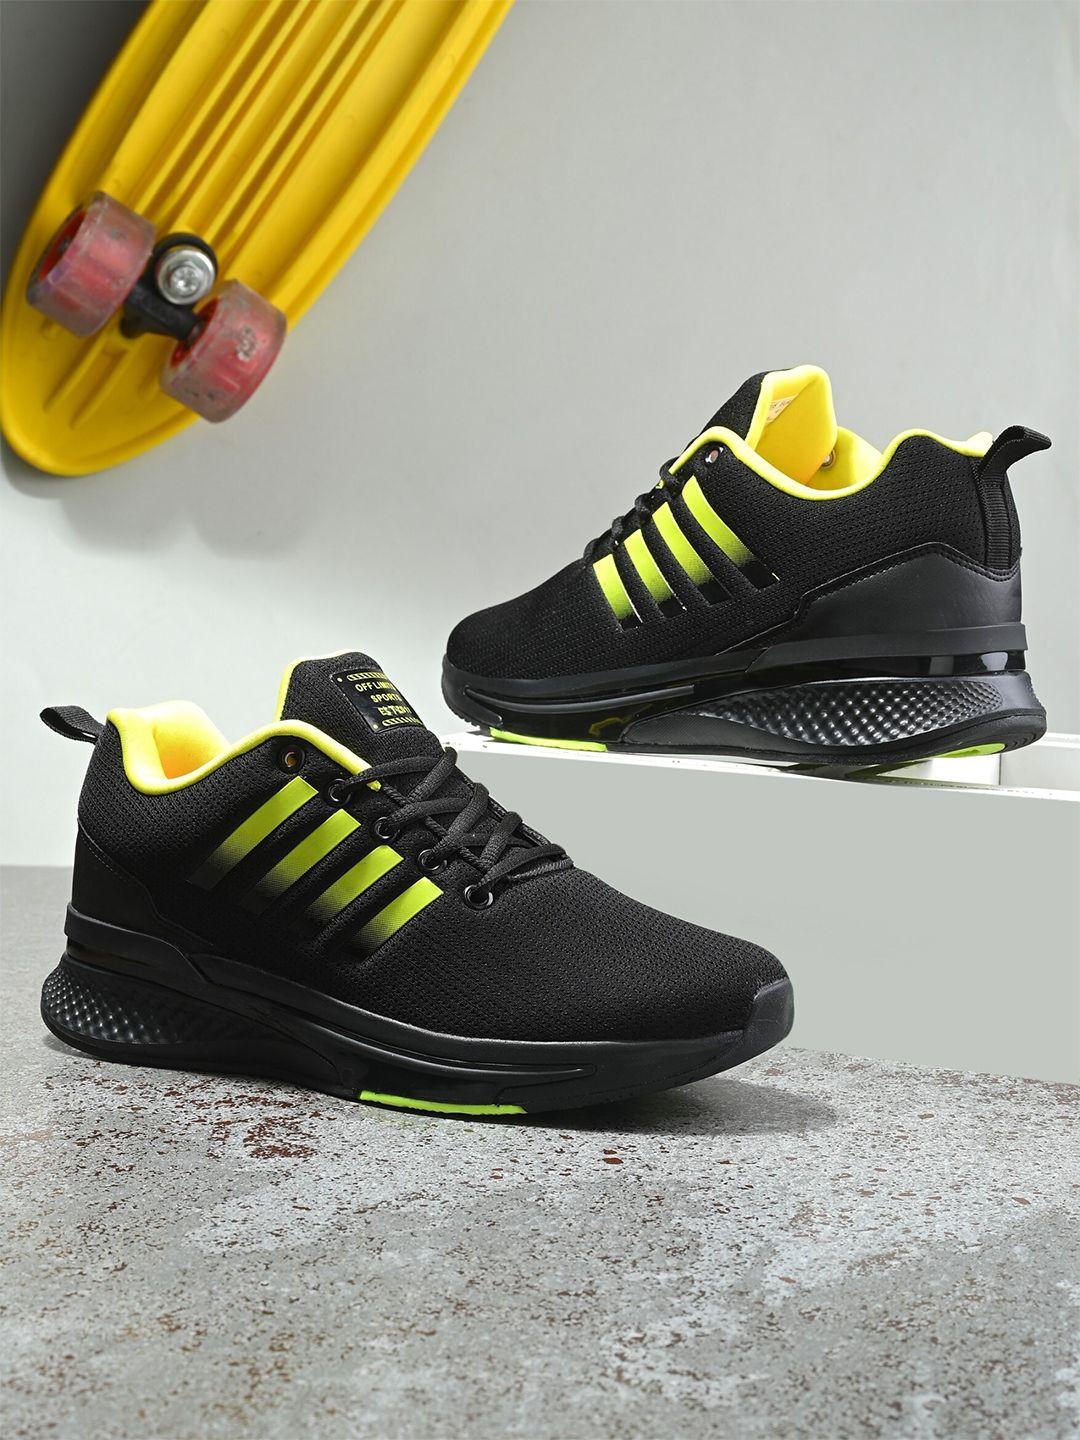 OFF LIMITS Men Mesh Lace-Up Running Non-Marking Shoes